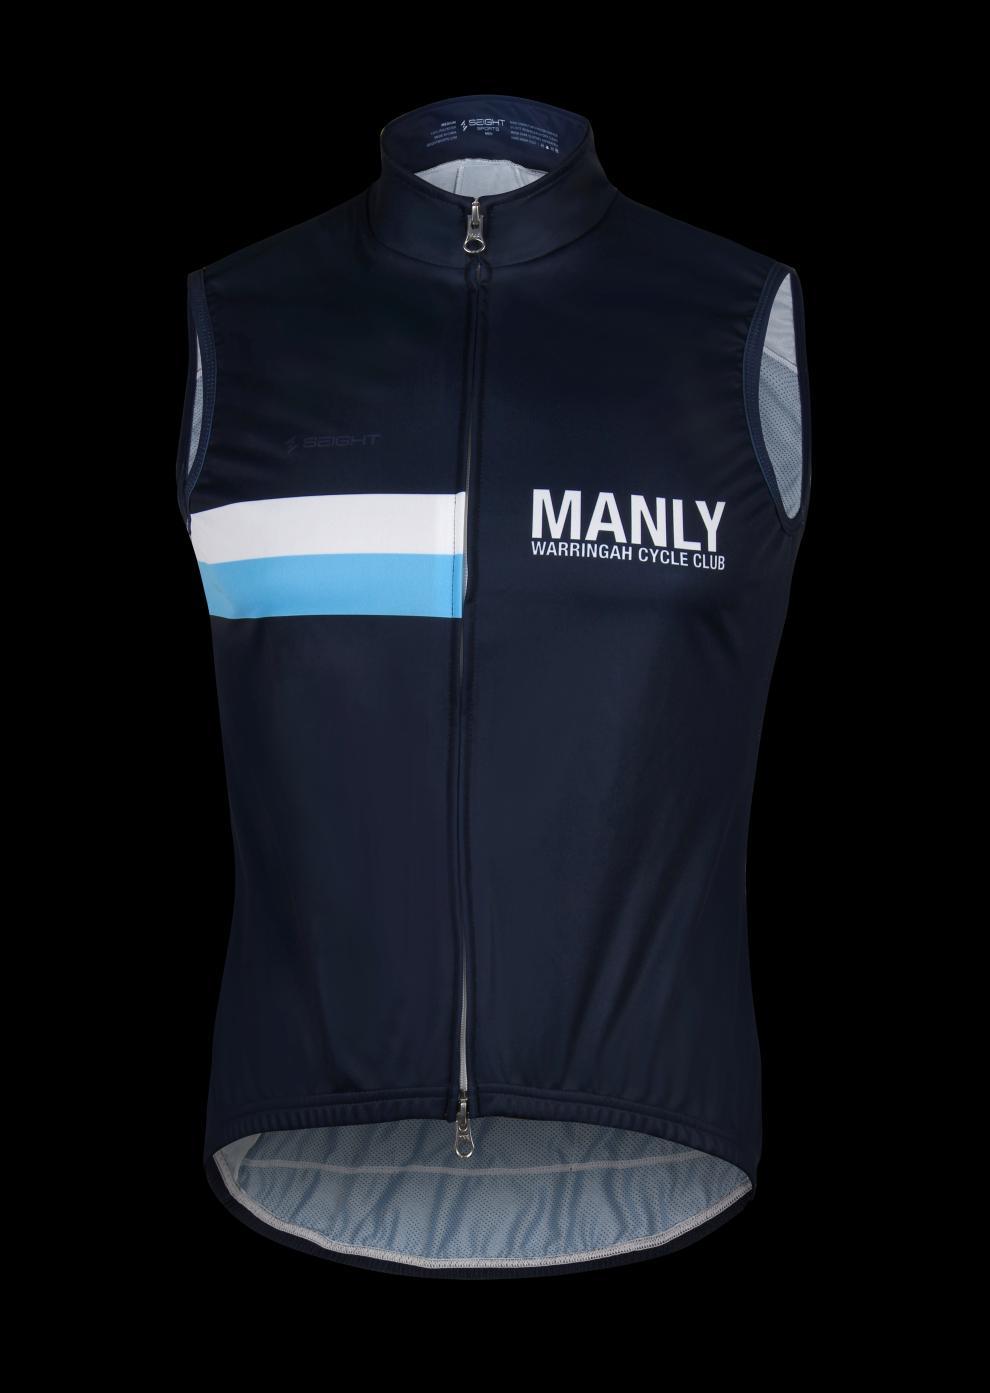 Elite Pro Wind Vest Specifically designed to provide optimal wind and water resistance, the Seight Elite Pro Wind Vest uses a multi-panel shield which protects you from wind and rain while providing